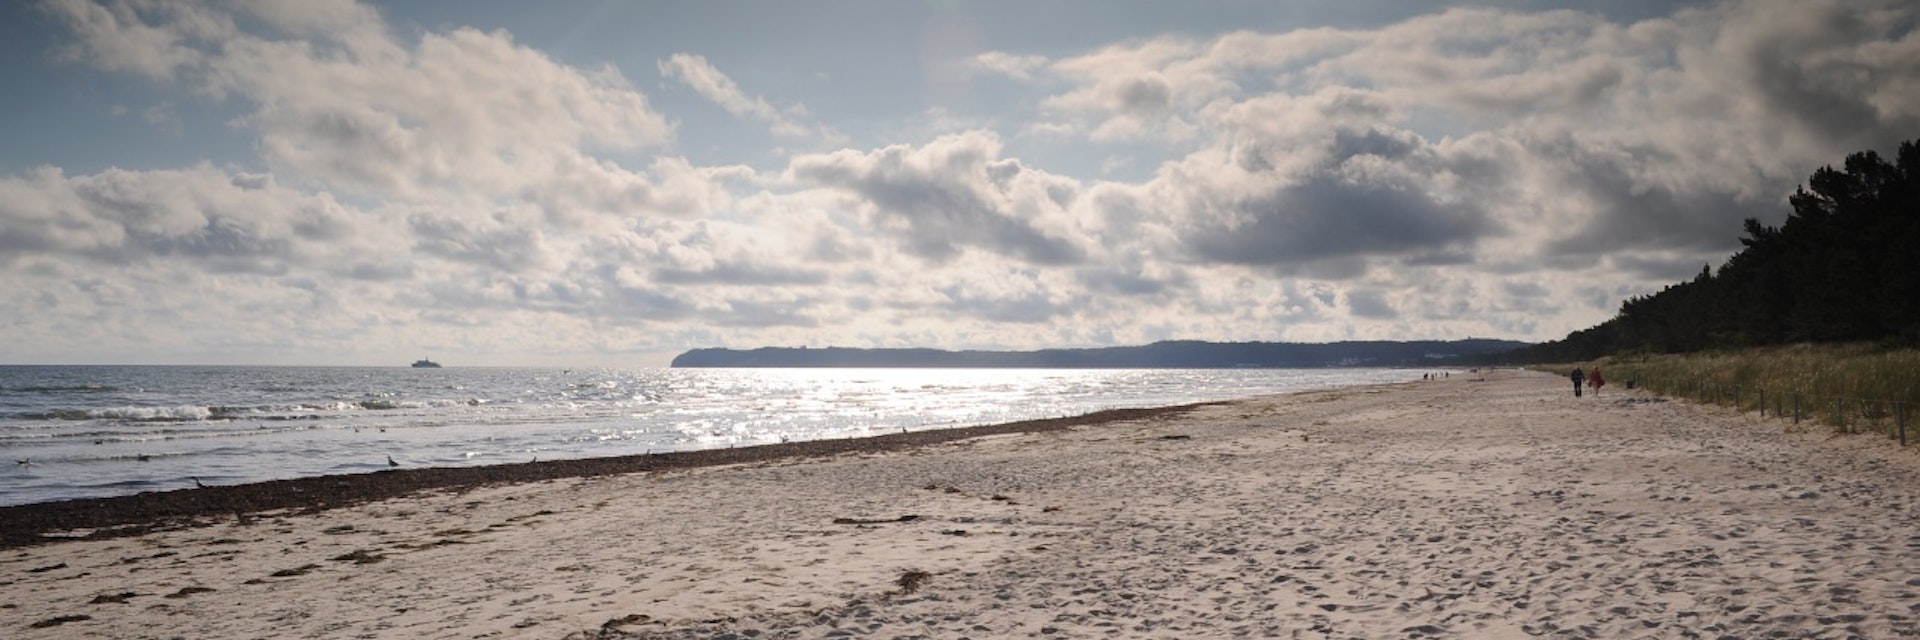 Overview of Prora beach.